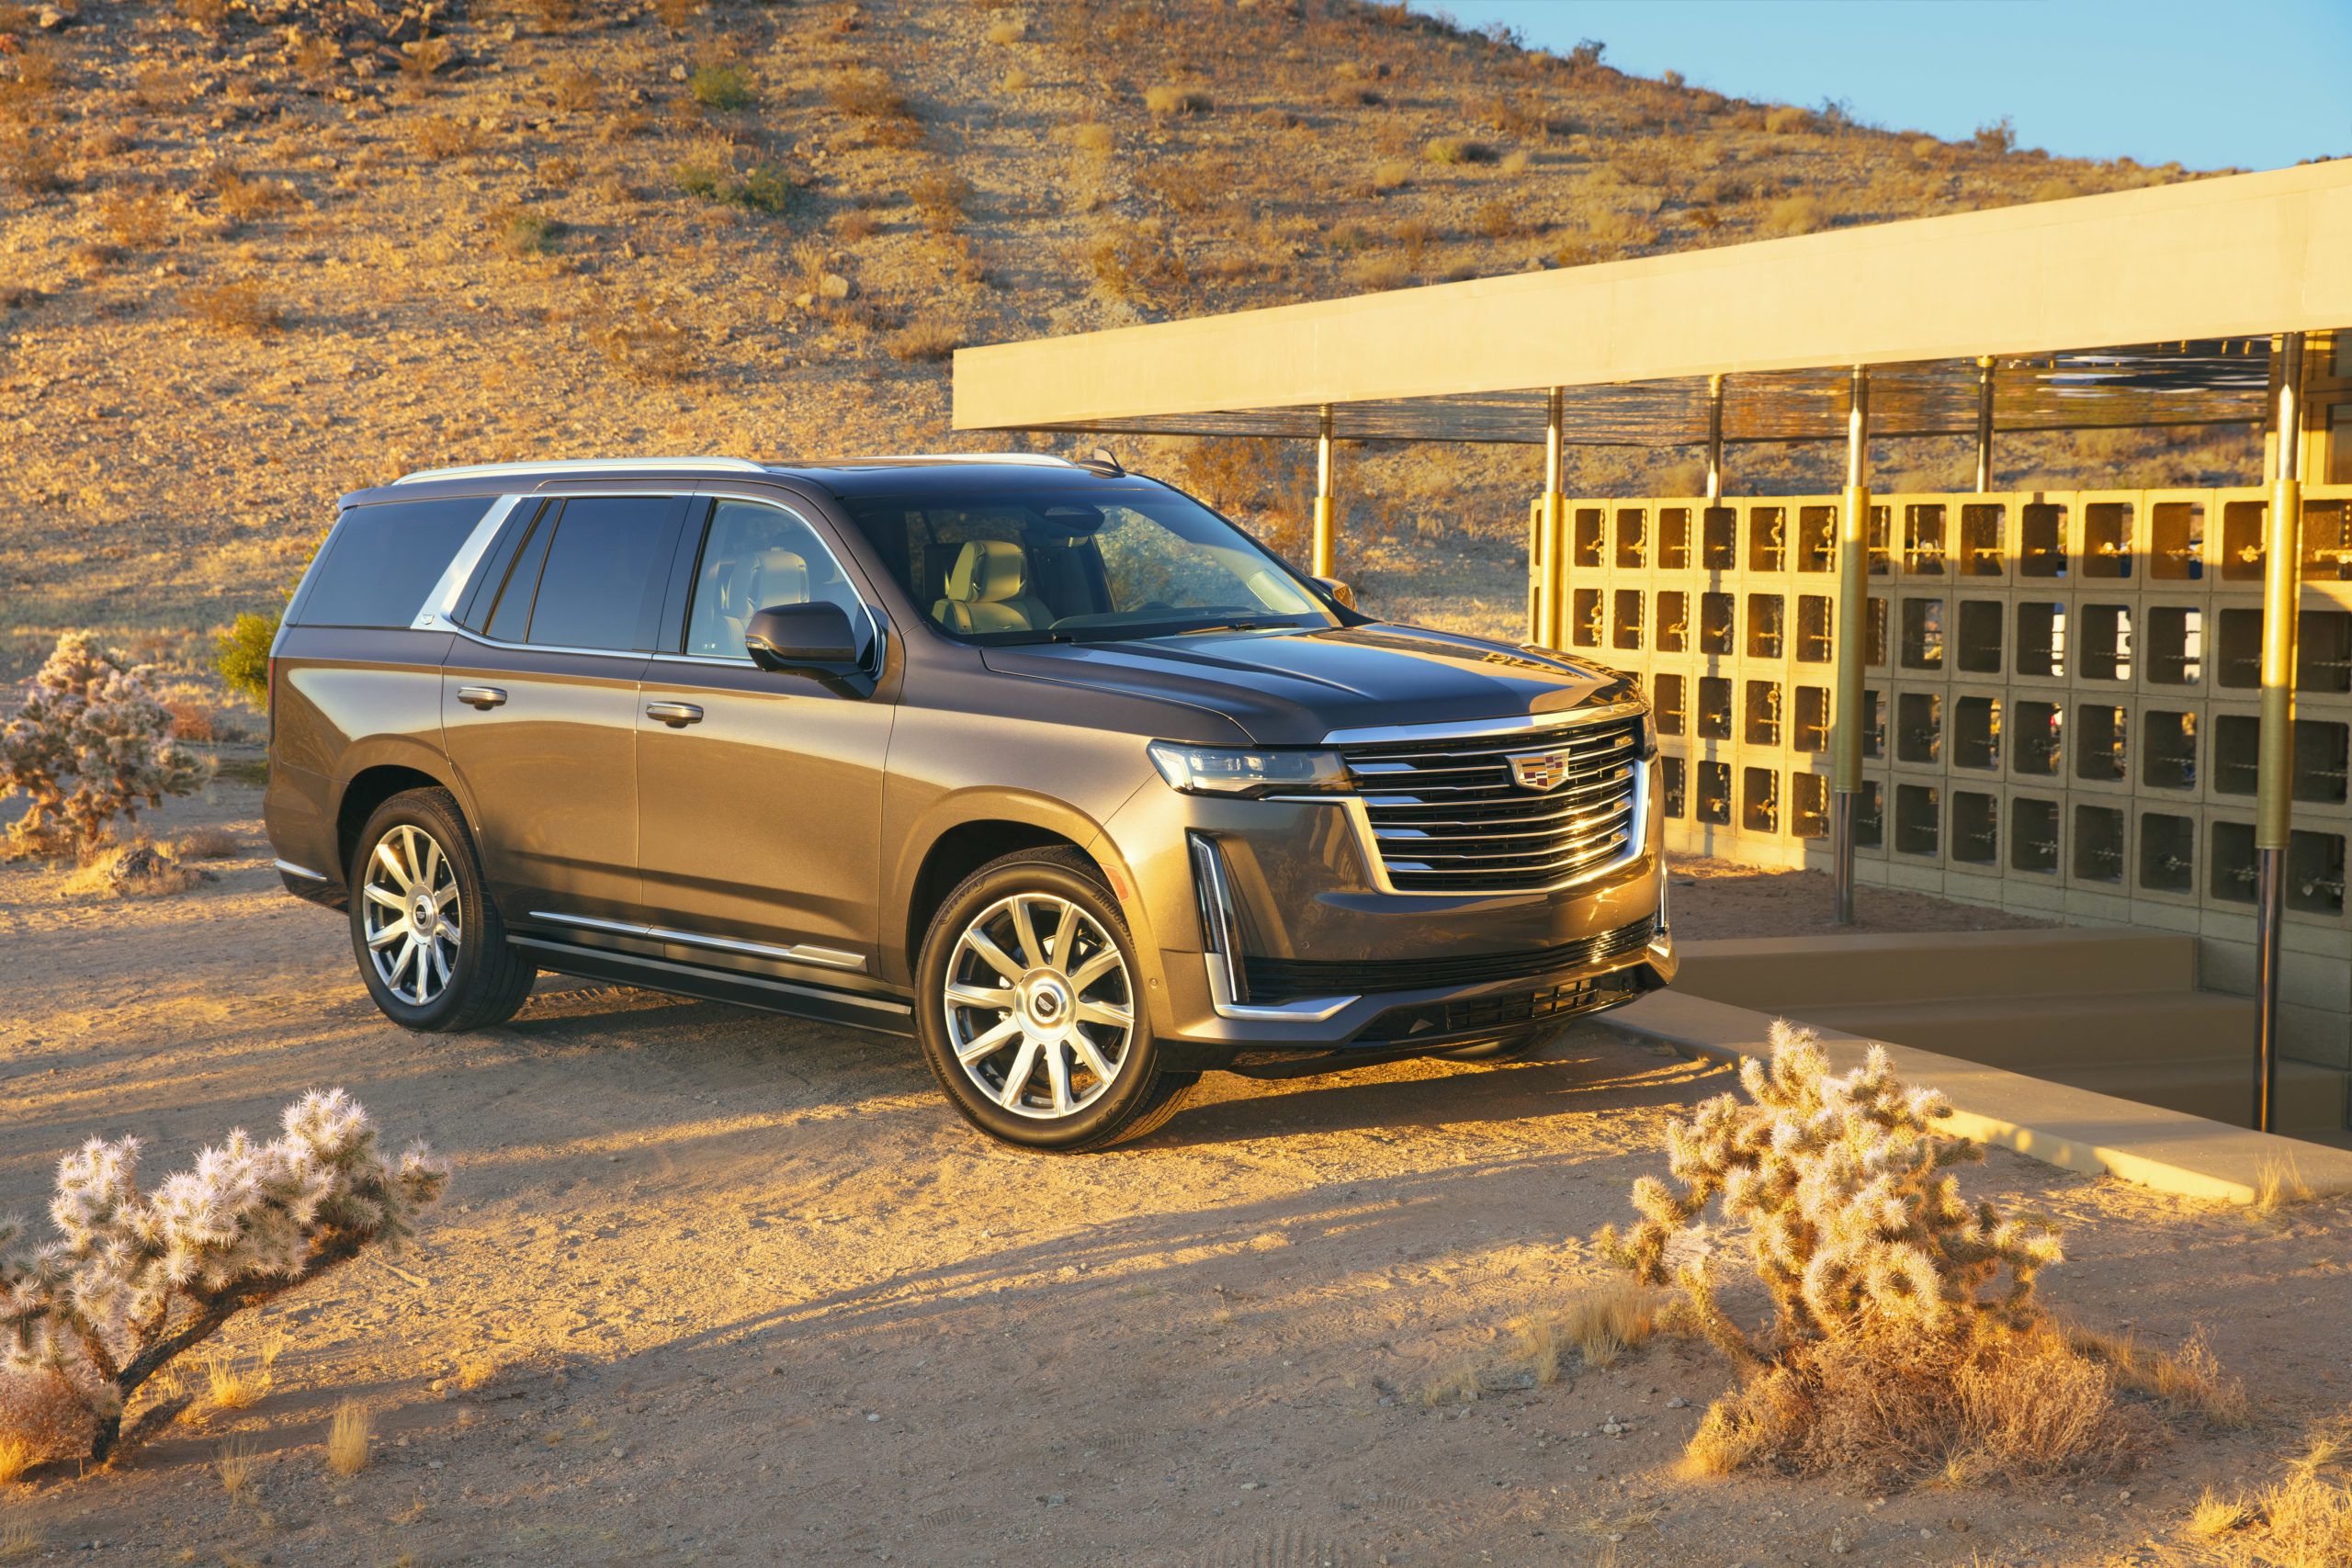 The 2021 Escalade has the bold presence and exclusive technology